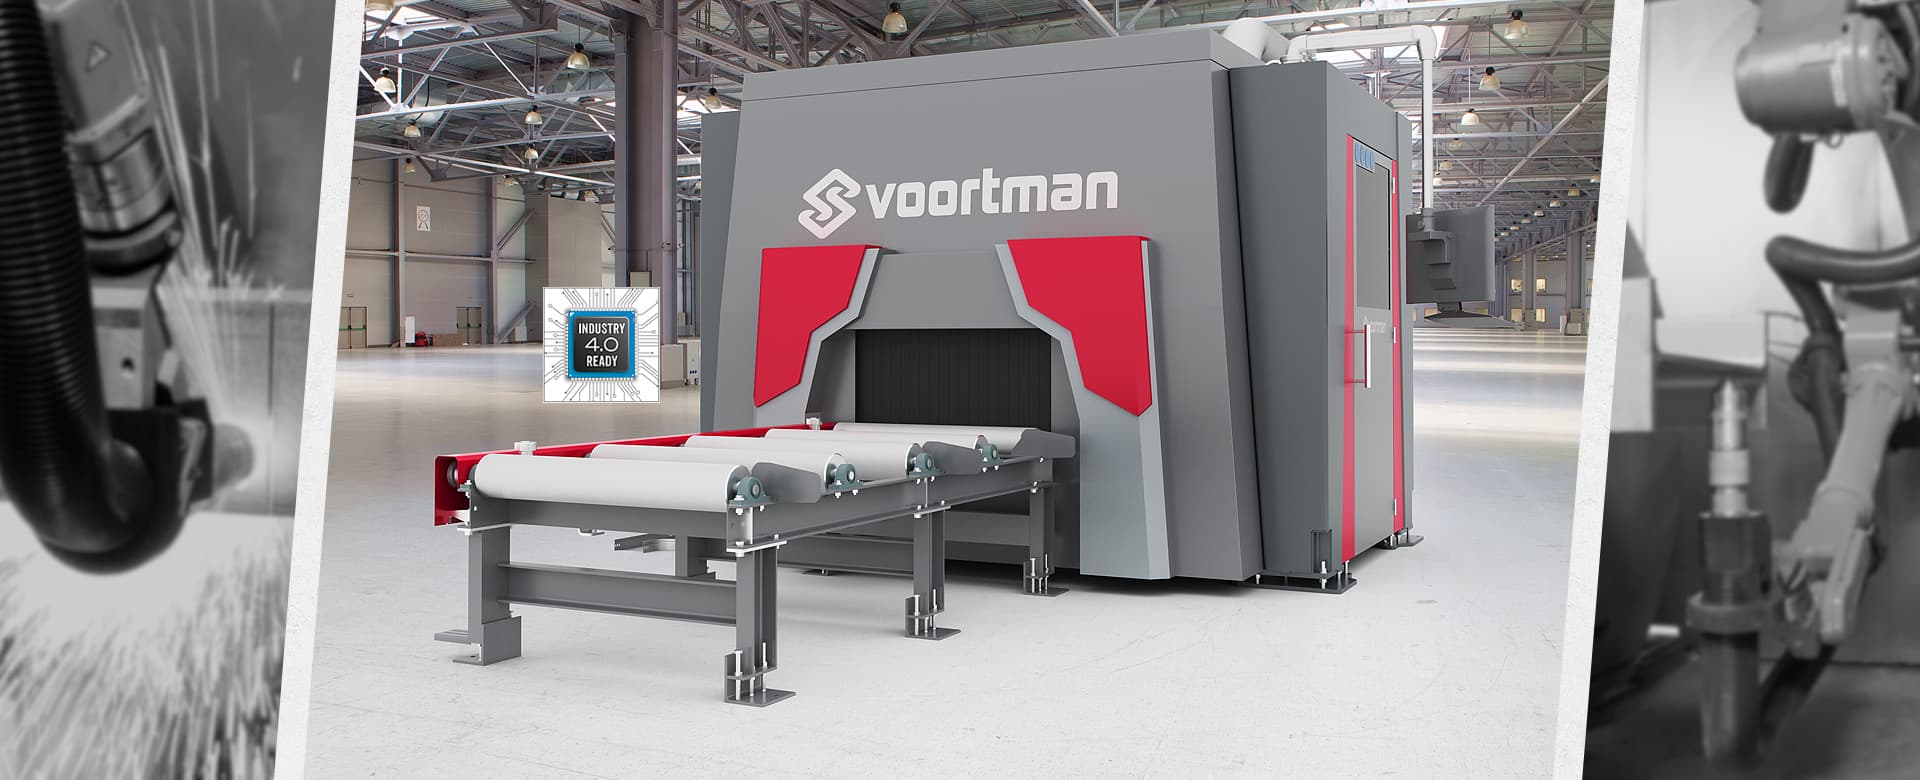 GSS Machinery offers the Voortman V807 which provides a 7 AXIS robotic arm that can cut and mark on all 4 sides